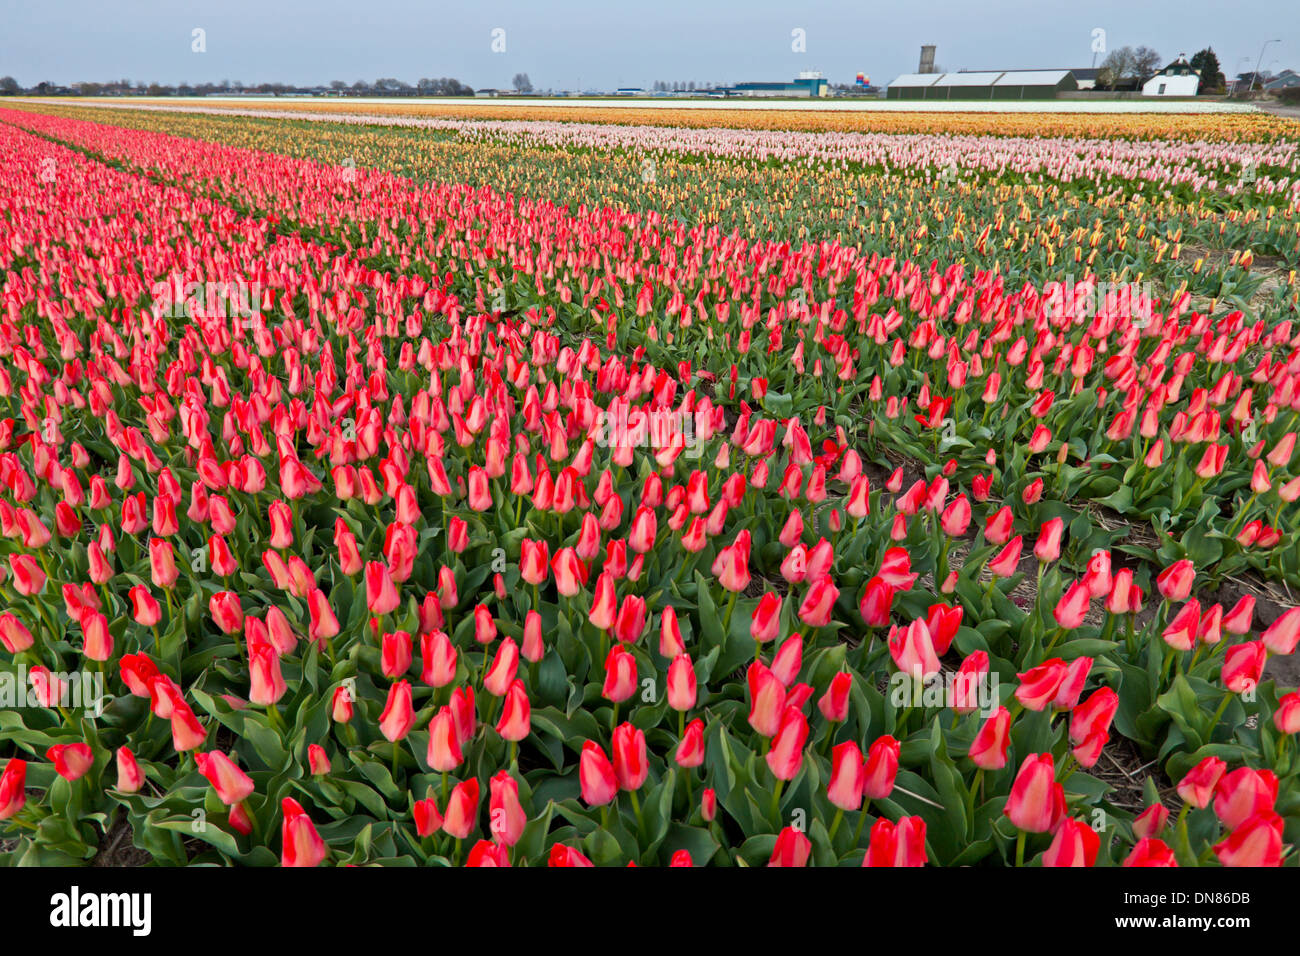 Spring time in The Netherlands: Colorful tulips in various colors, flowering at full peak, Lisse, near Keukenhof, South Holland. Stock Photo